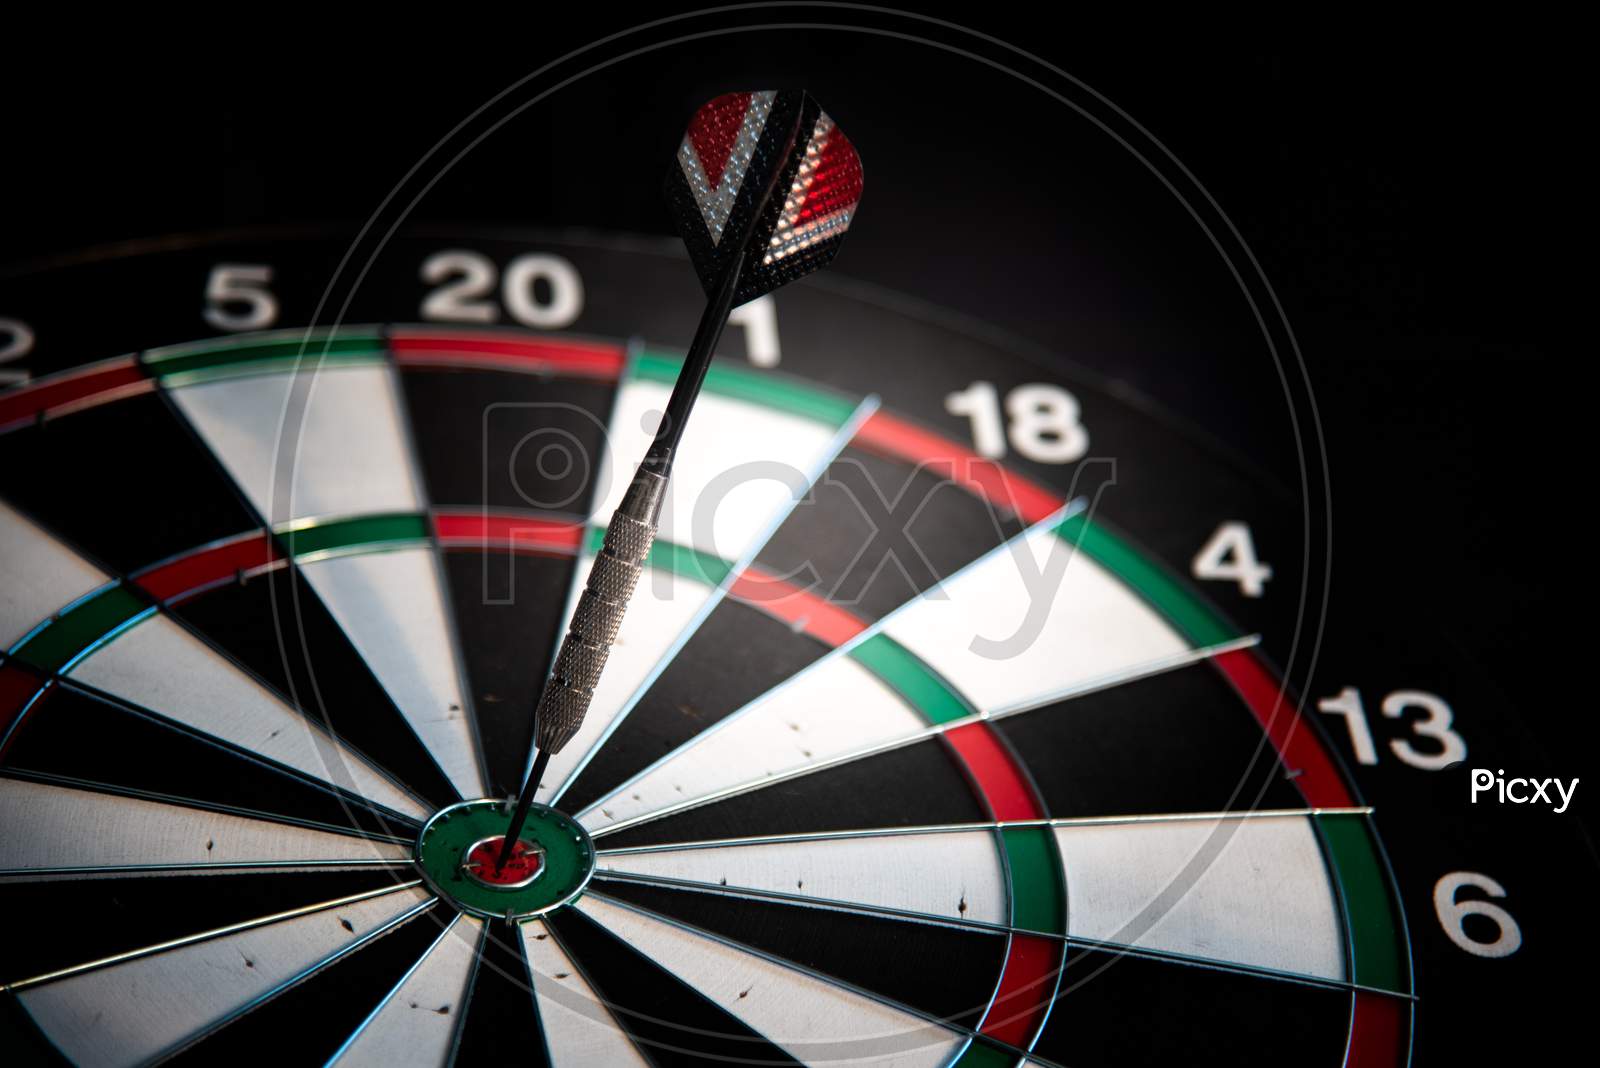 Darts Arrows In Center Target. Business And Leisure Concept. Many Attempts To Succeed Theme.